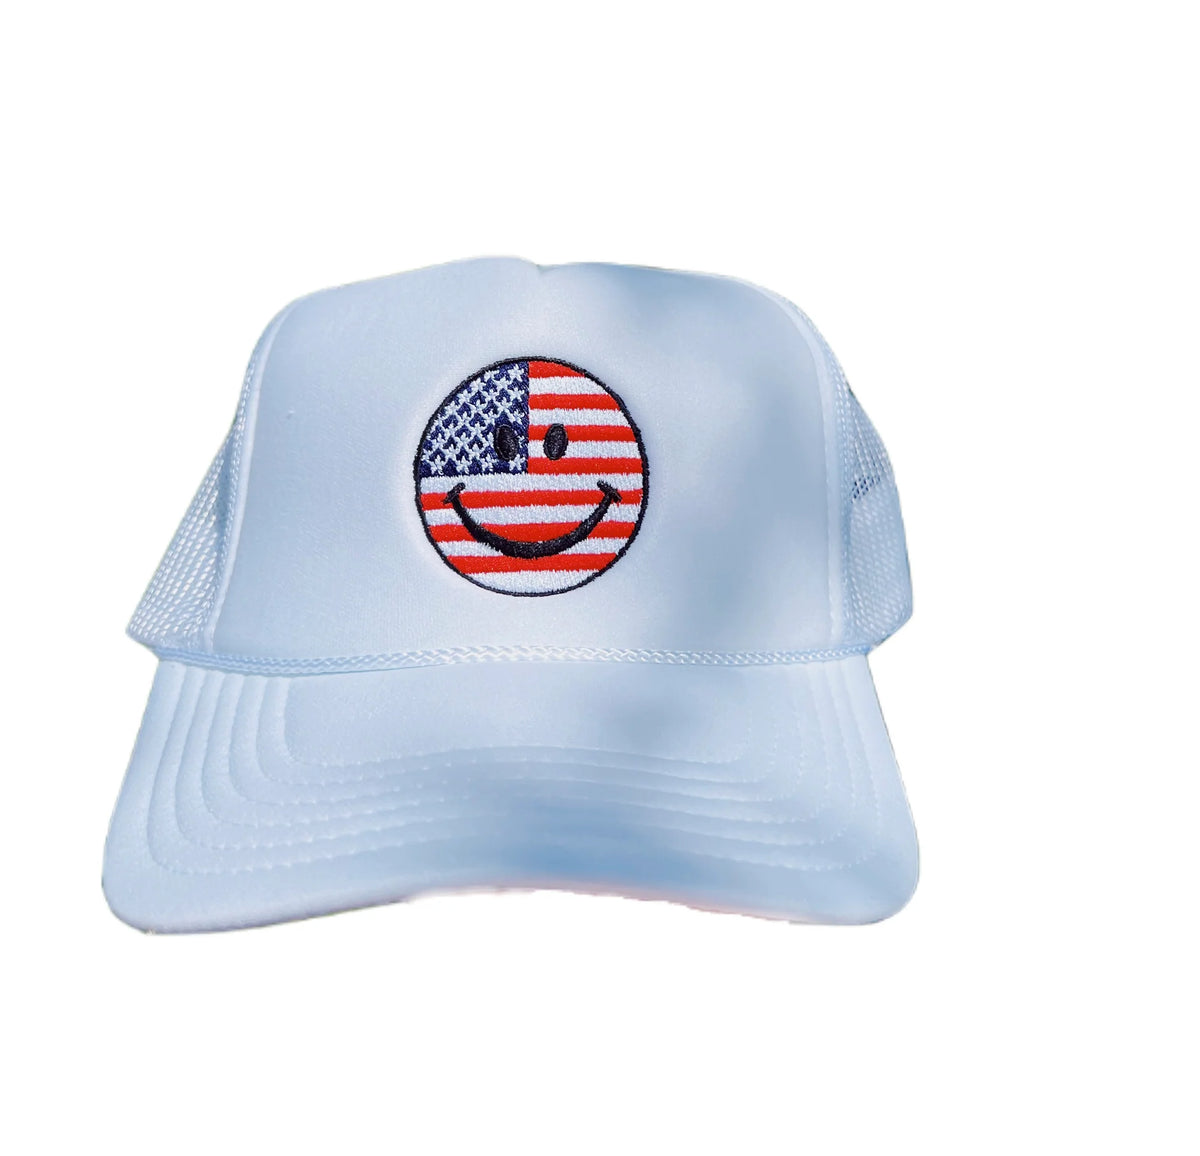 smiley face usa trucker hat